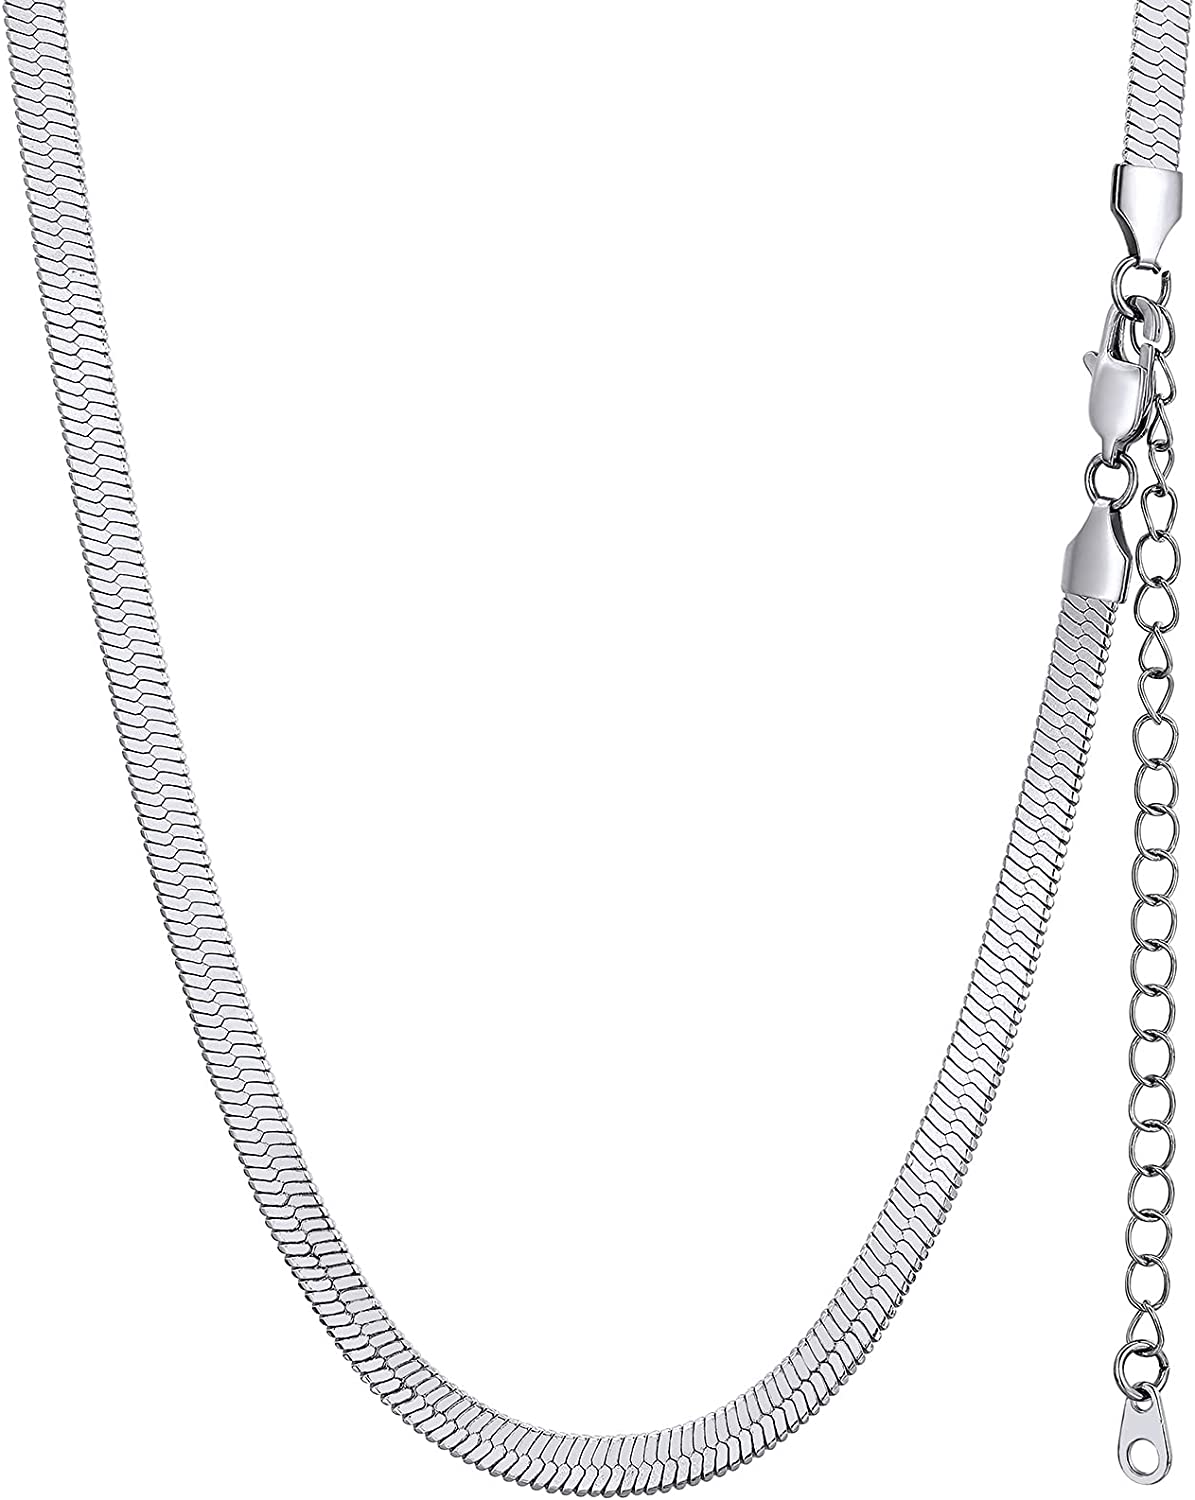 GoldChic Jewelry Flat Chain Necklace,Stainless Steel 3mm/5mm Snake Chain Herringbone Choker Necklaces for Women in Gold/Silver/Rose Gold ,12/15/18 inches with 3.5 inch Extenders,Gift Box Included